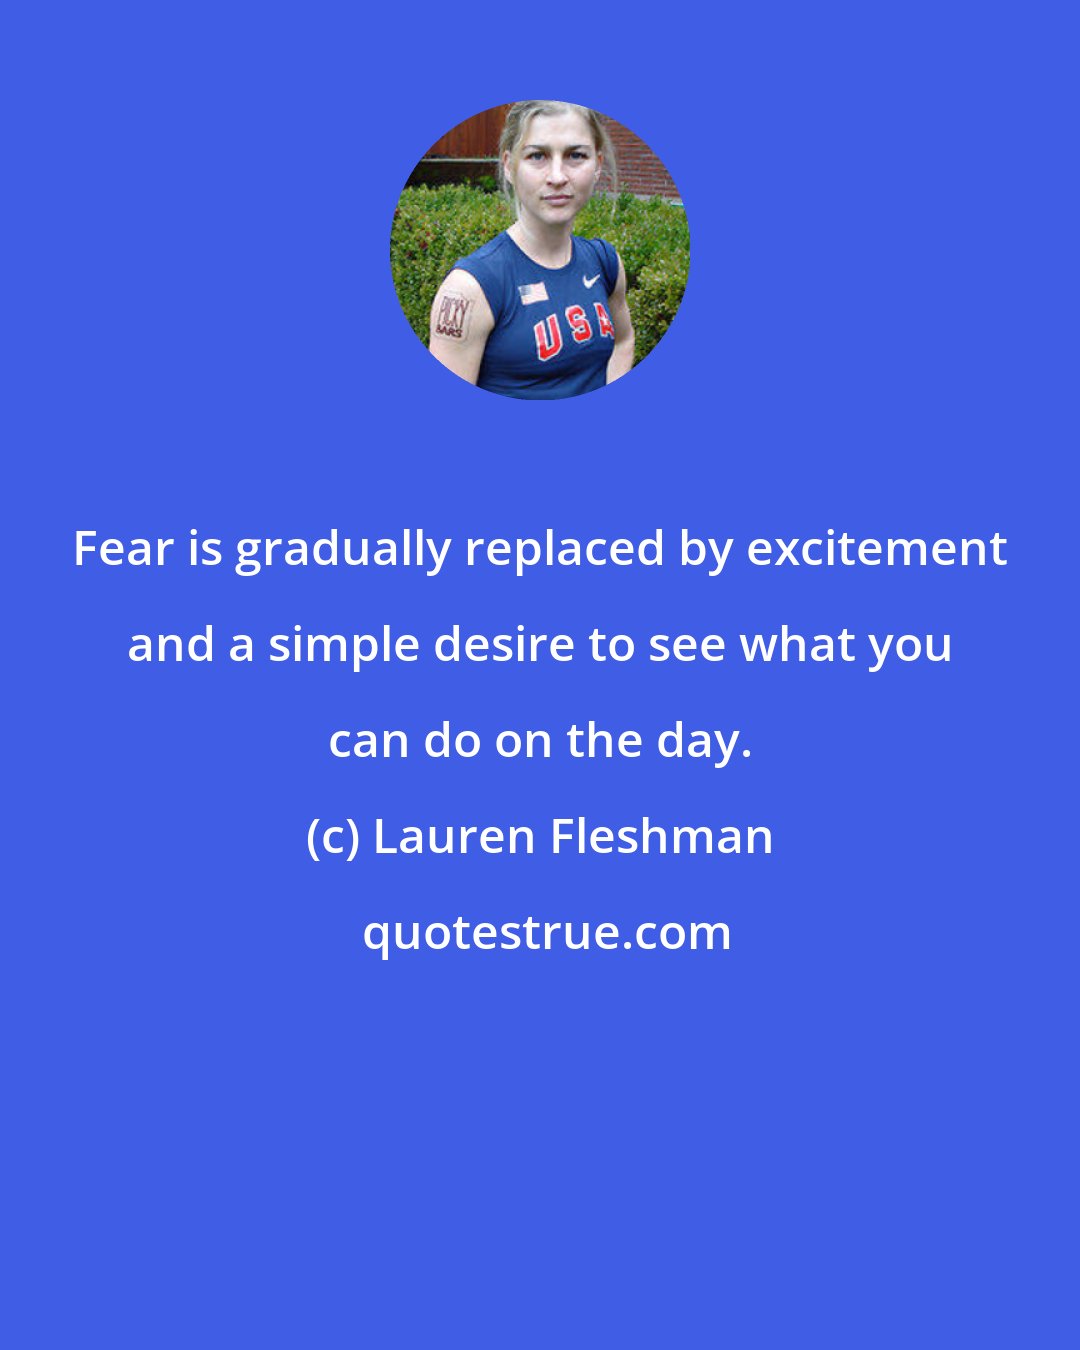 Lauren Fleshman: Fear is gradually replaced by excitement and a simple desire to see what you can do on the day.